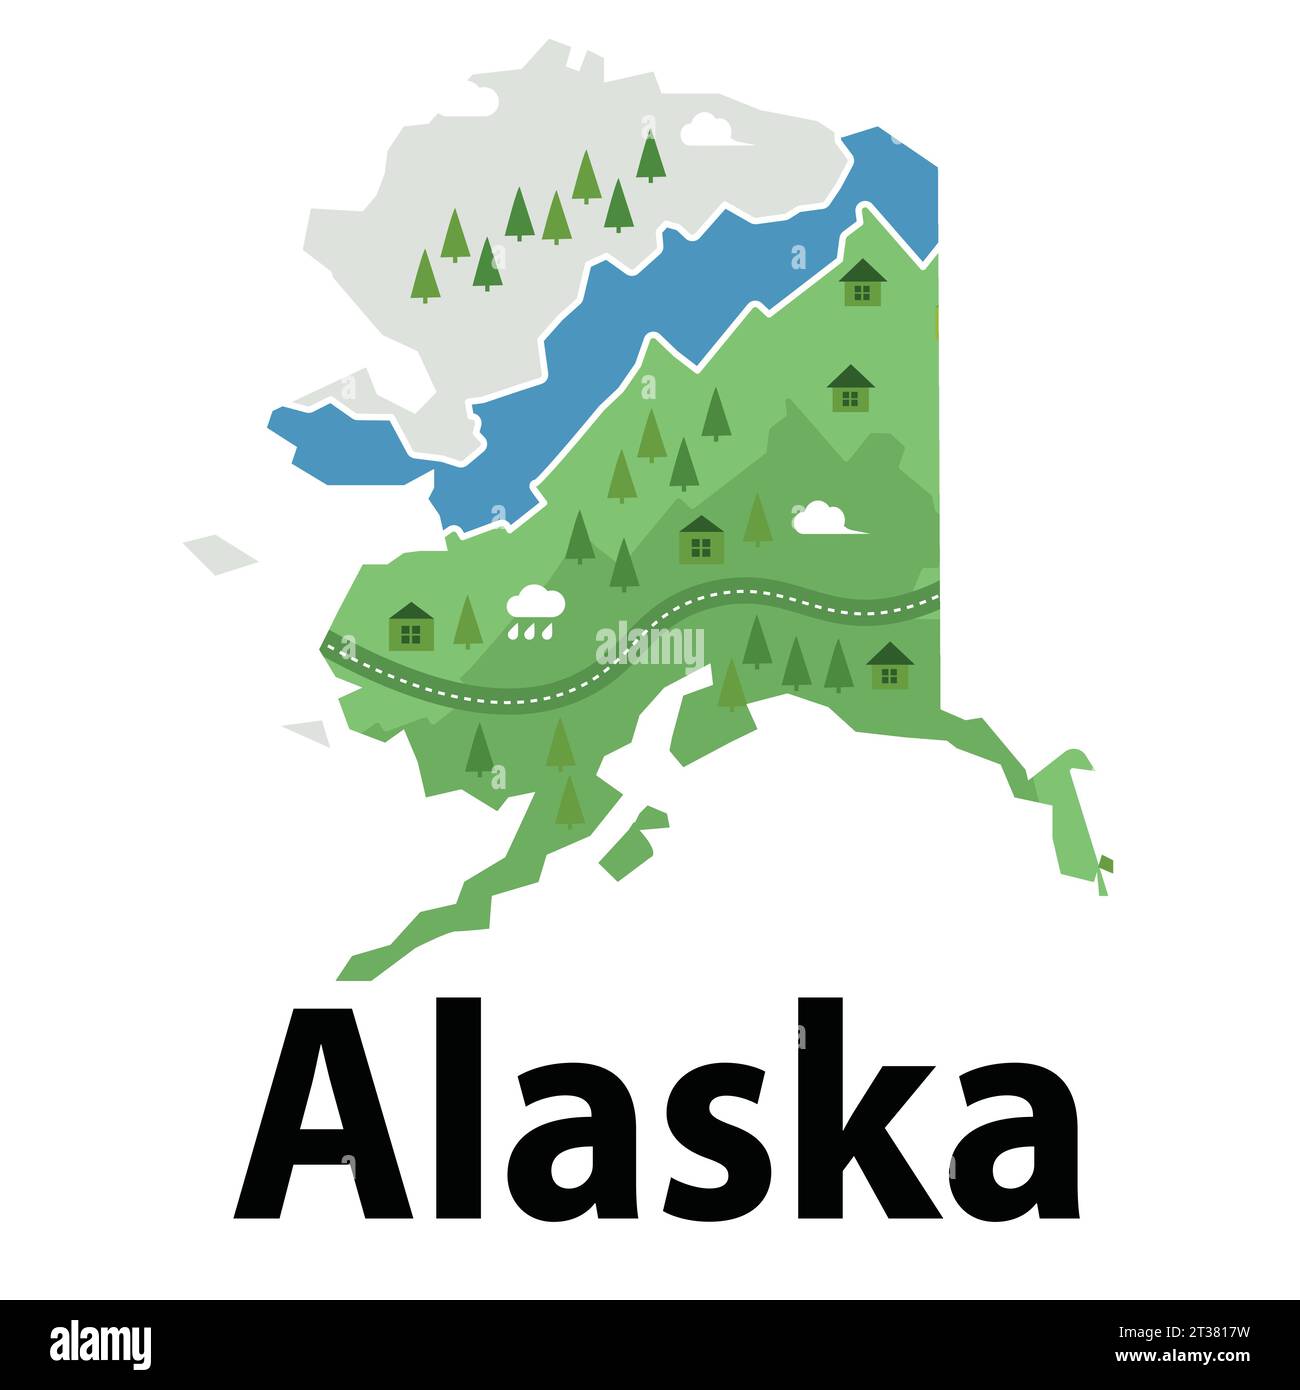 Alaska map drawing illustration cartoon style natural graphic forest Stock Vector